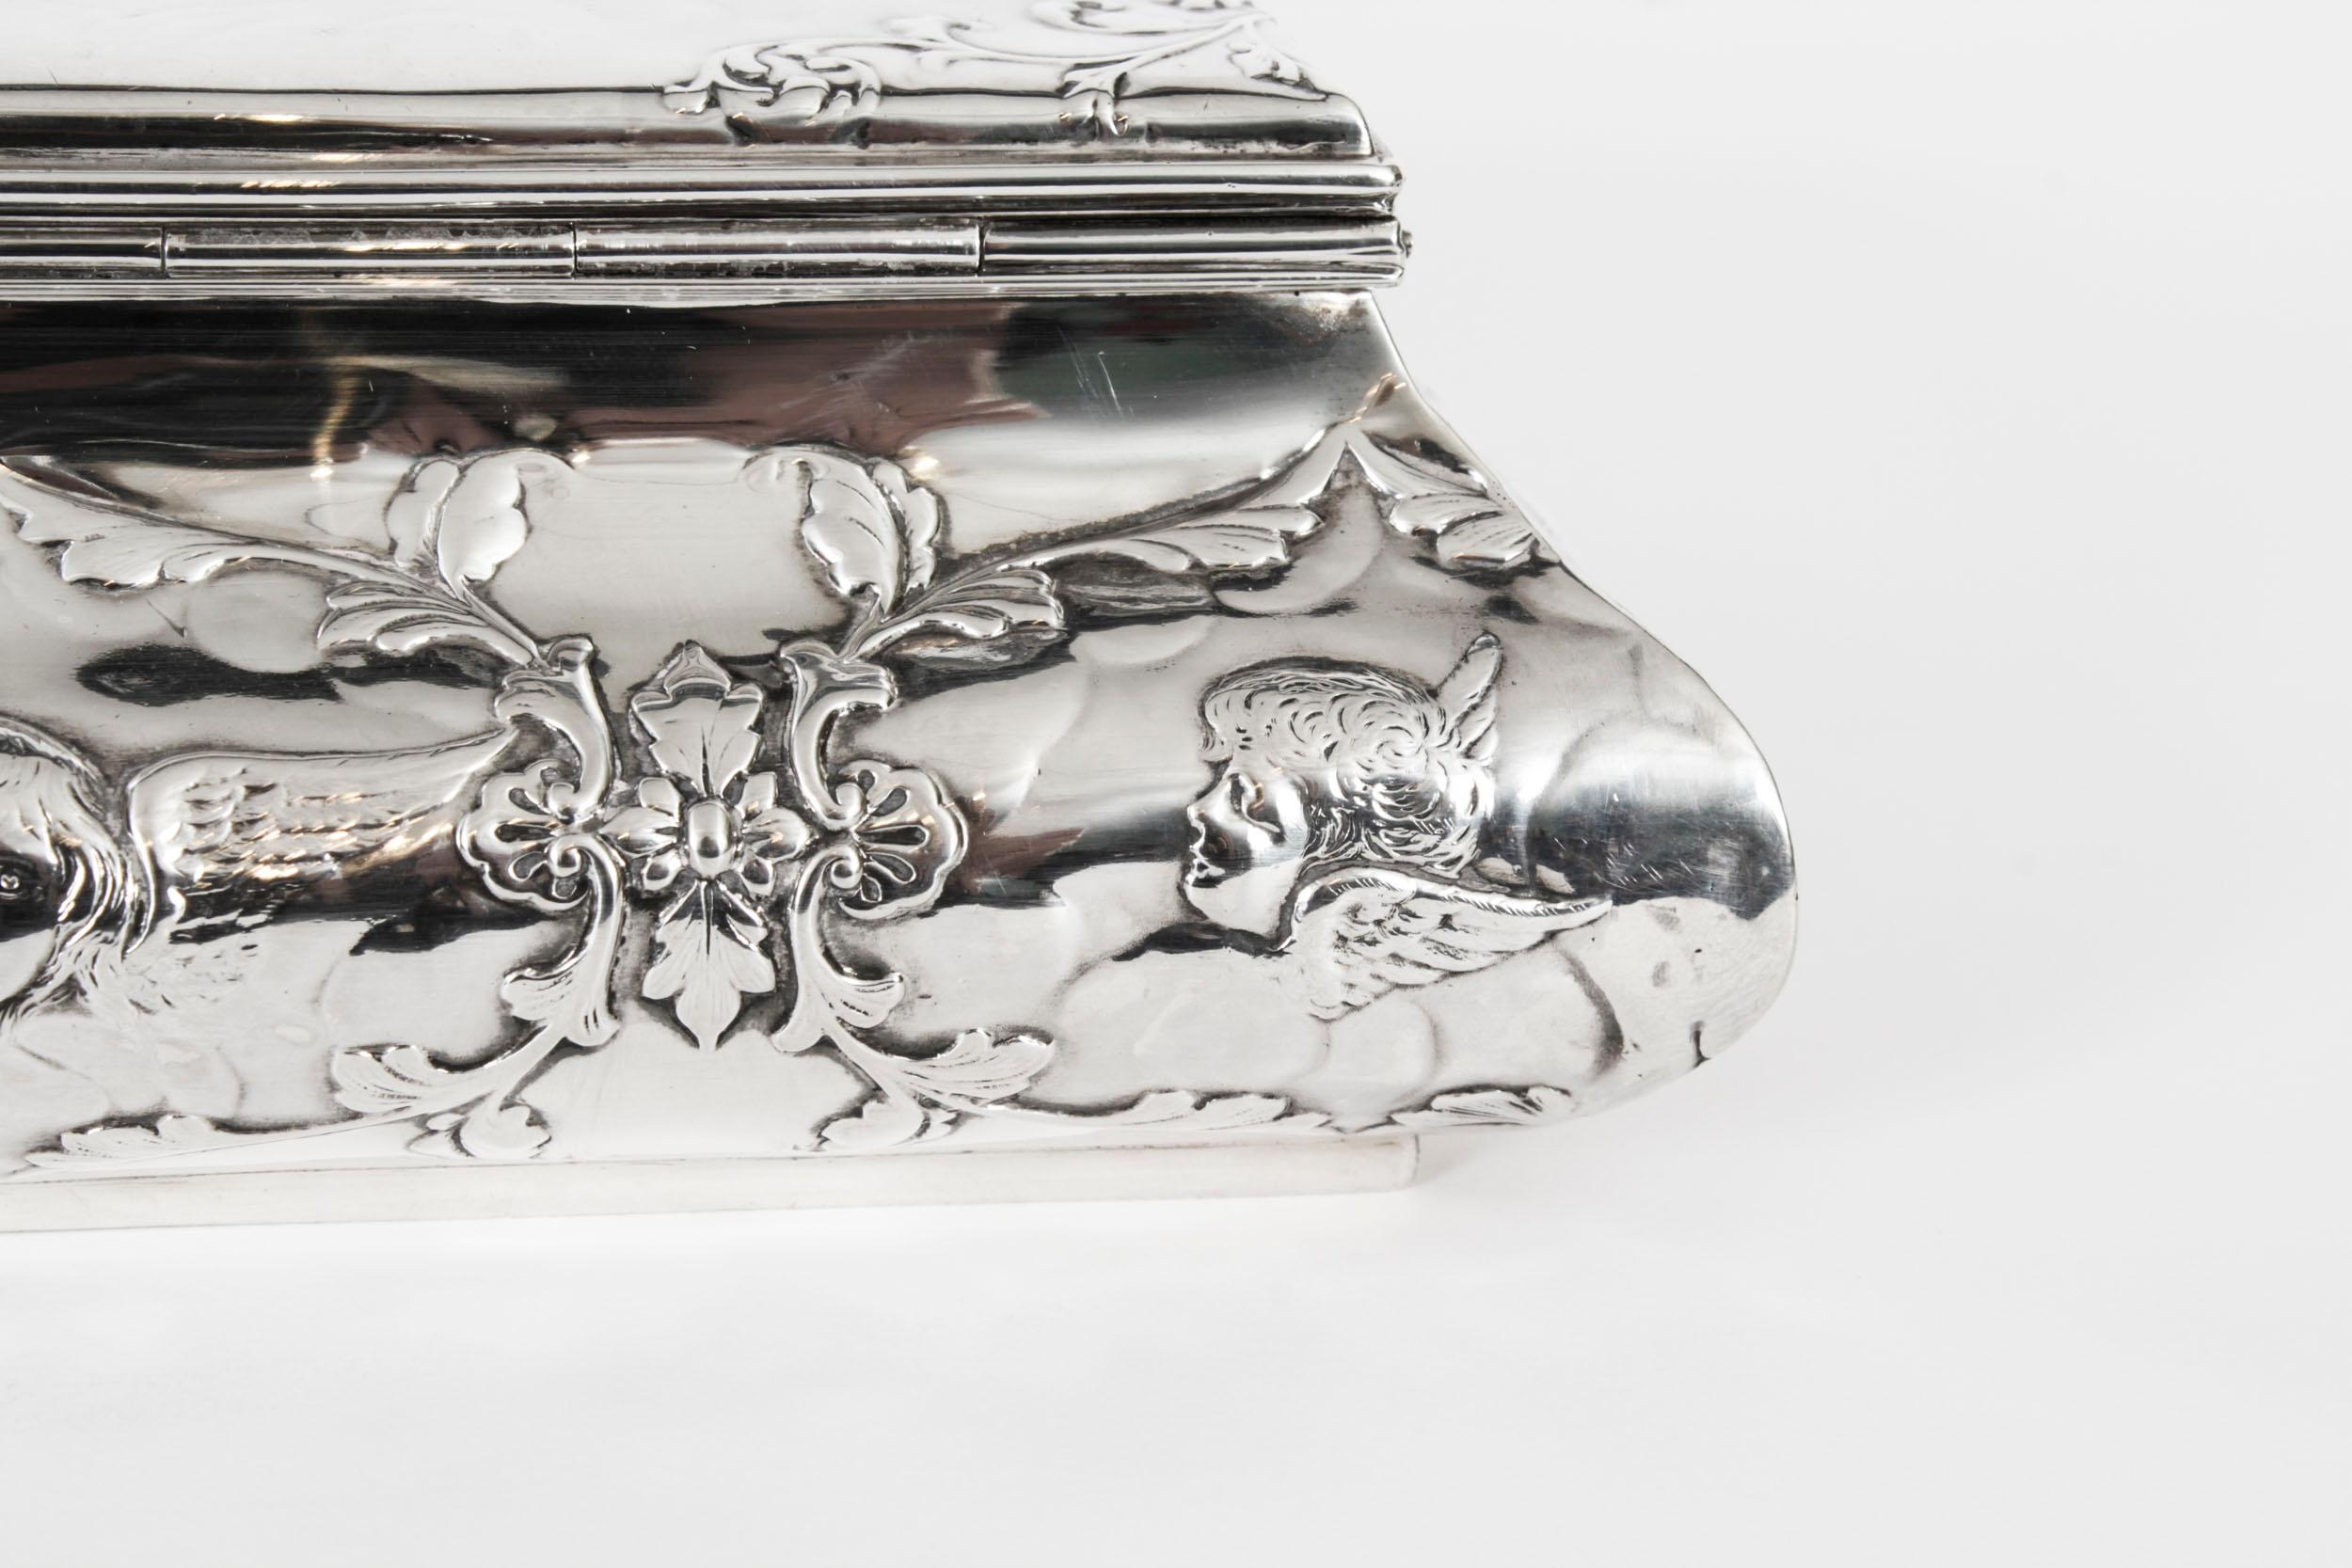 Antique Victorian Sterling Silver Casket by William Comyns & Sons 1898 For Sale 9